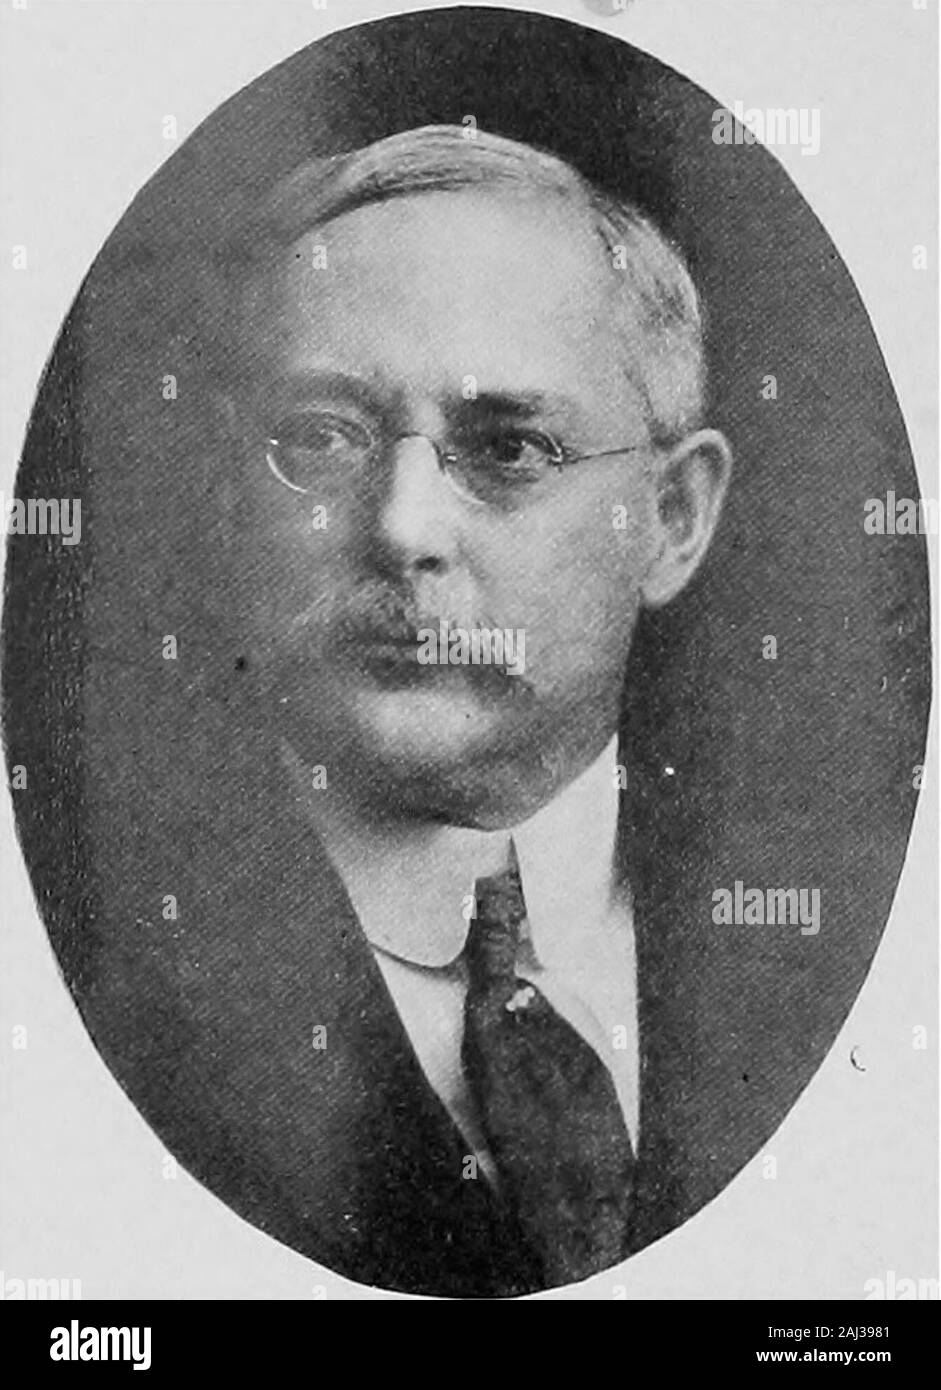 Empire state notables, 1914 . CHARLES OLIVER DEWEY Educator, Trustee Guardian Savings Bank Brooklyn, N. Y. LEWIS EDSON WATERMAN Manufacturer of Fountain Pens New York City 480 Empire State Notables CAPITALISTS, MERCHANTS, ETC.. Stock Photo